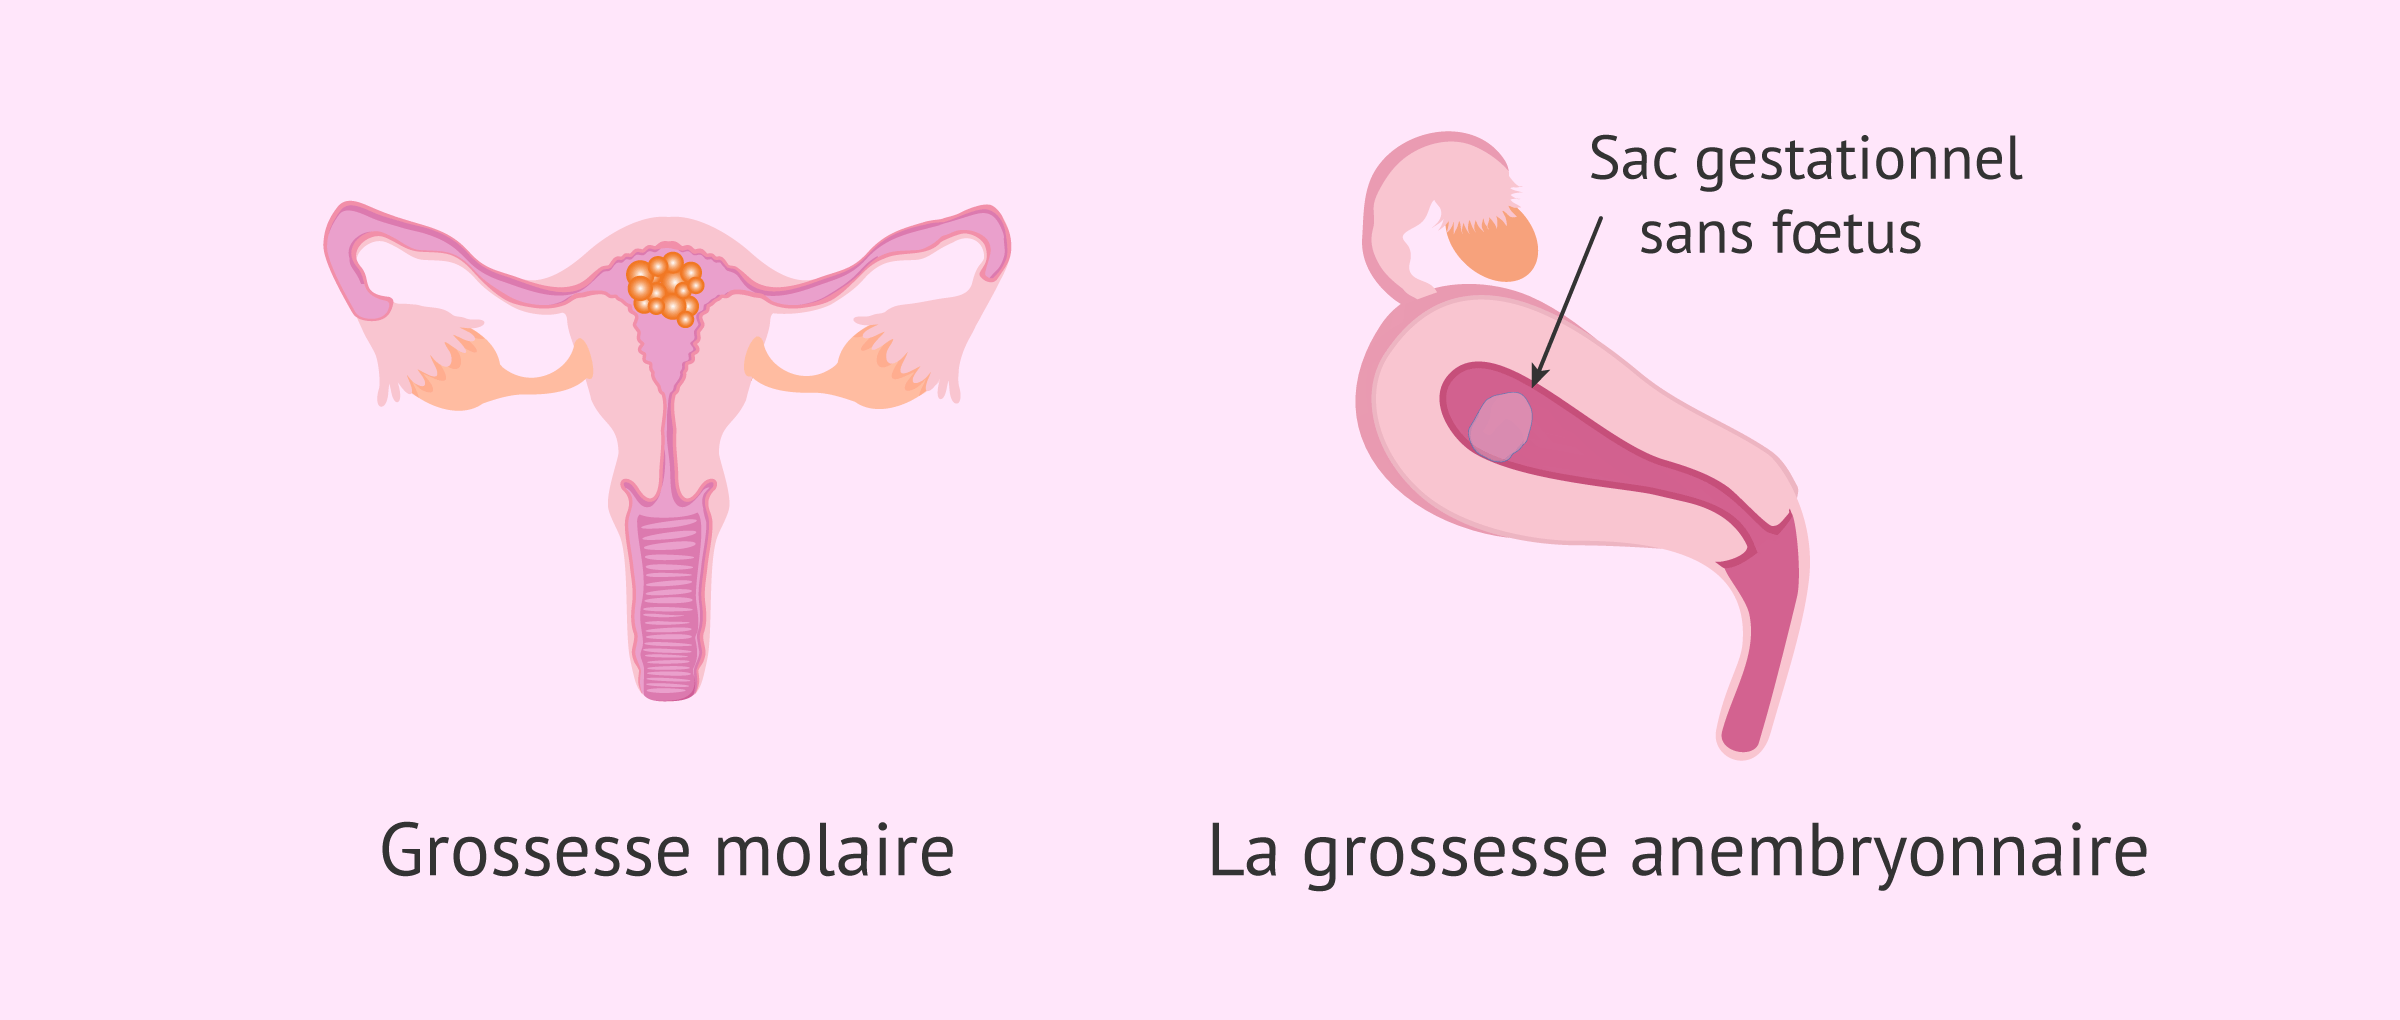 grossesse-molaire-anembryonnaire